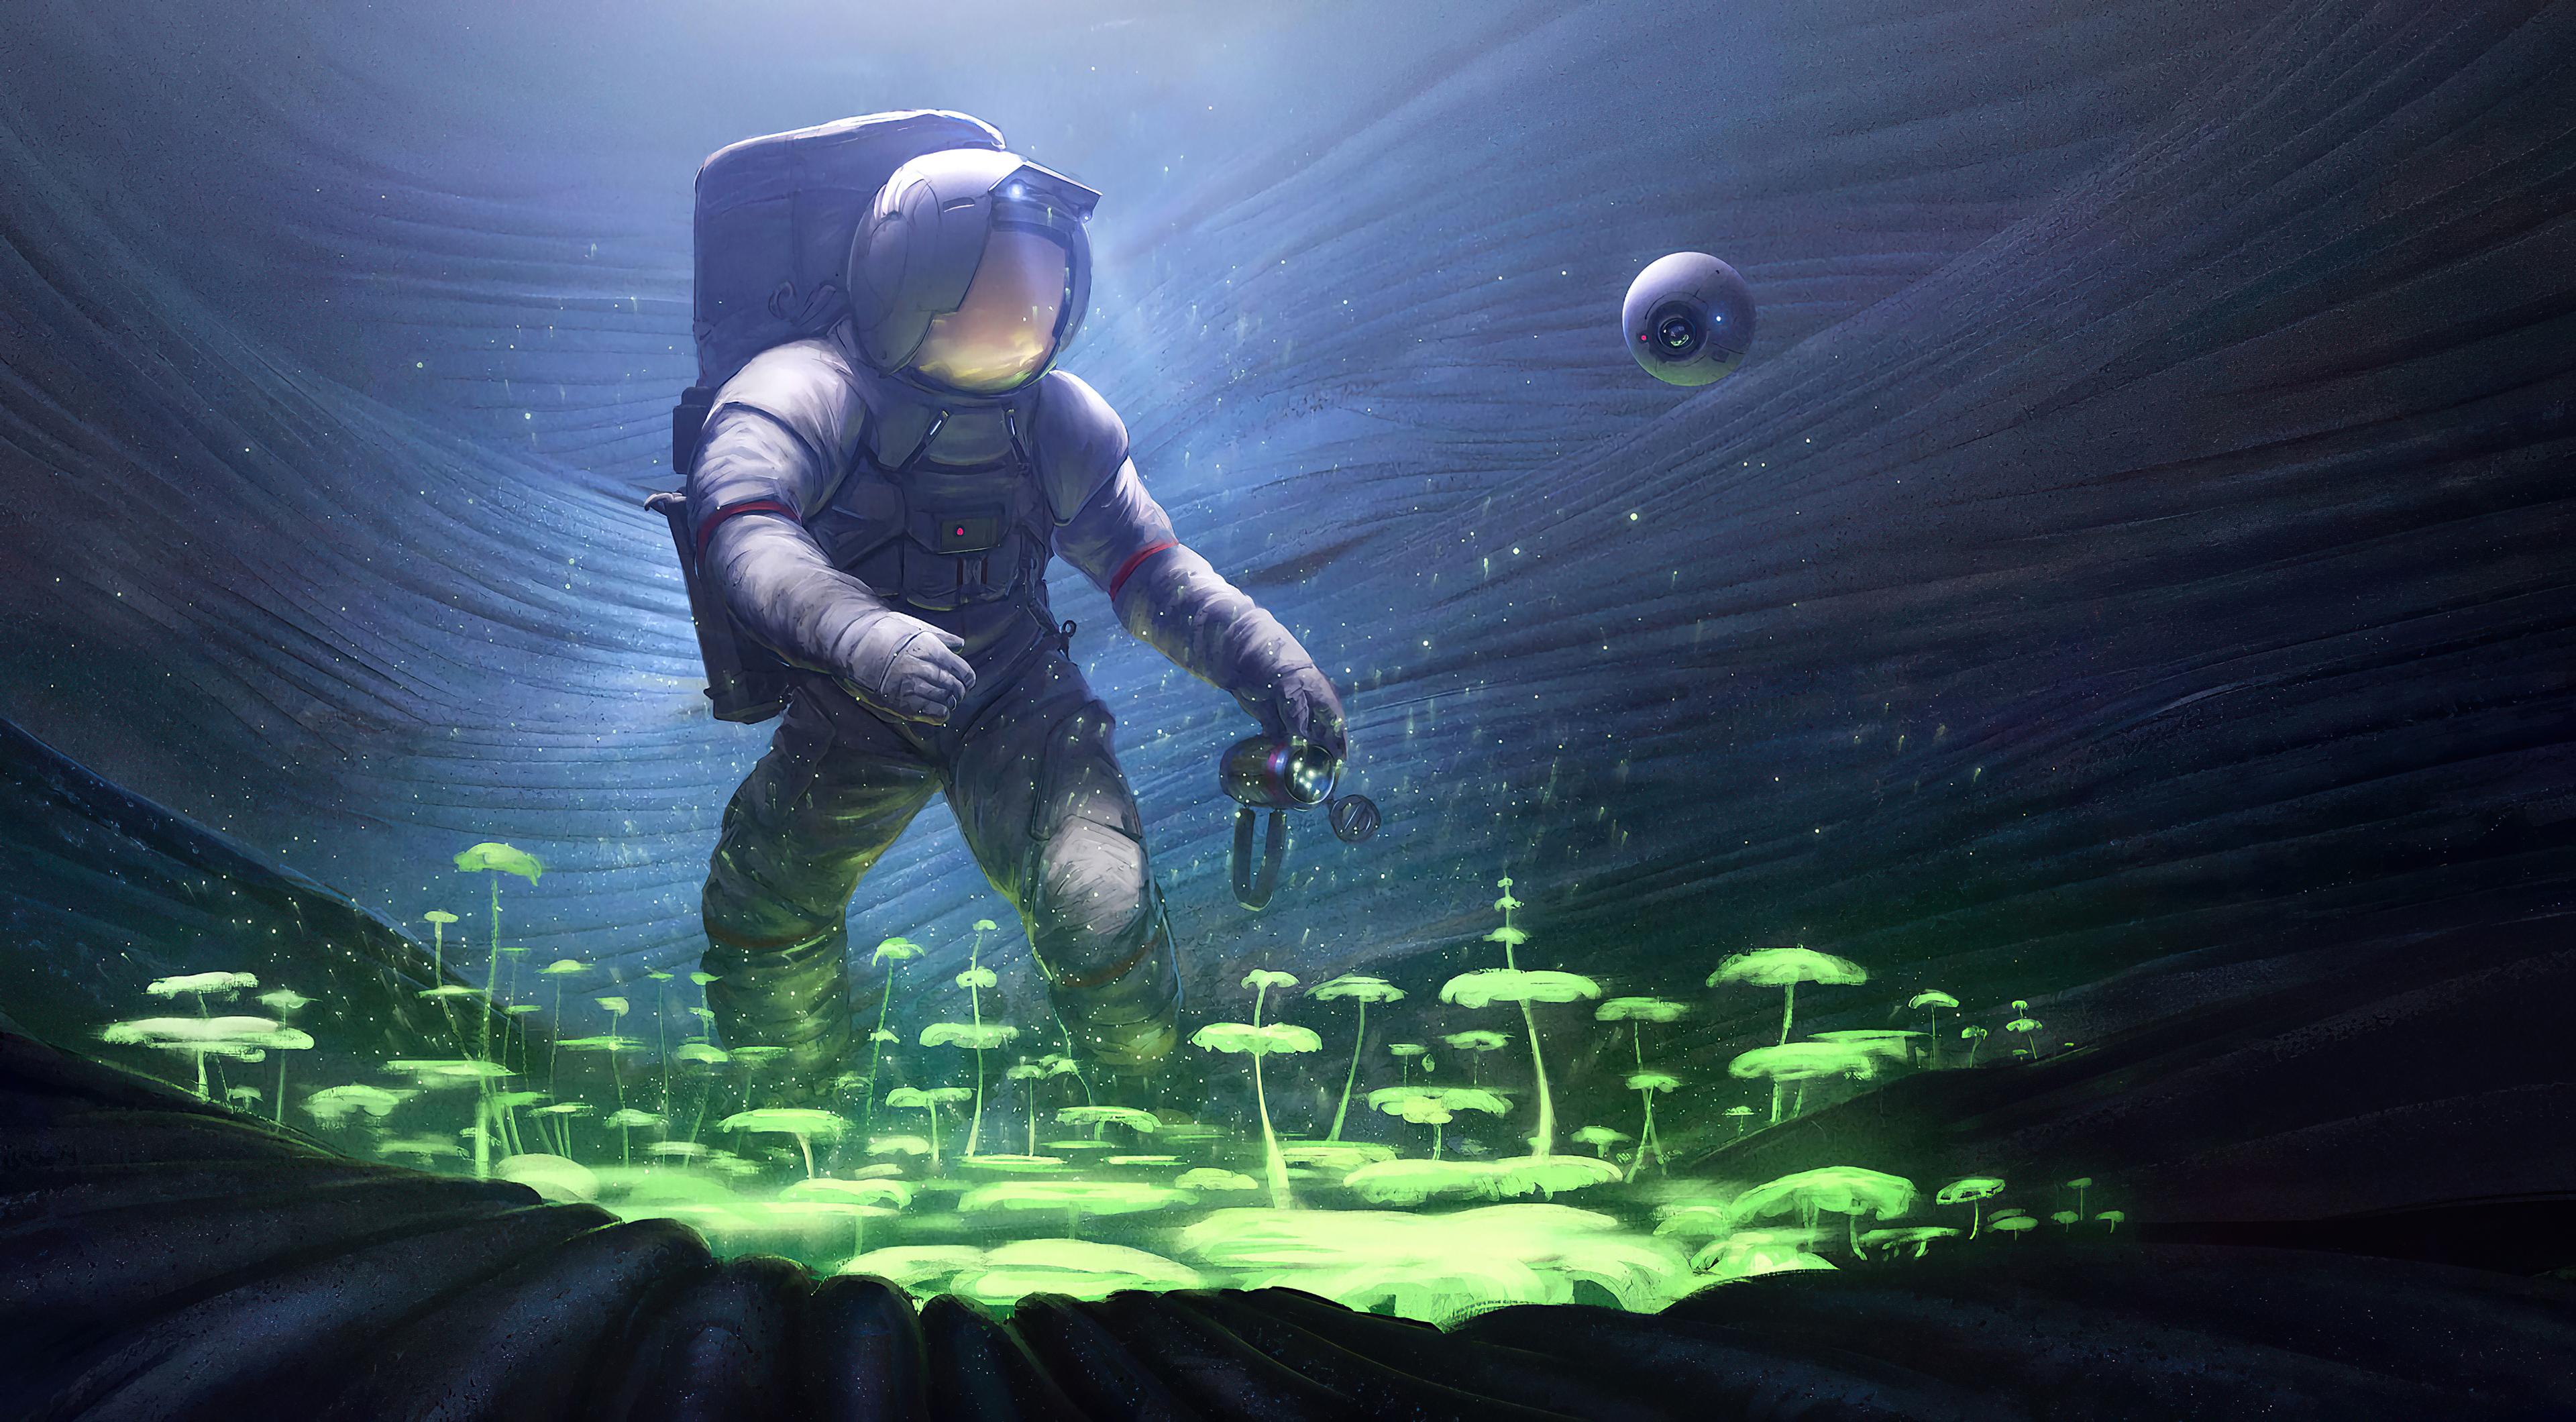 Trippy Astronaut Wallpapers